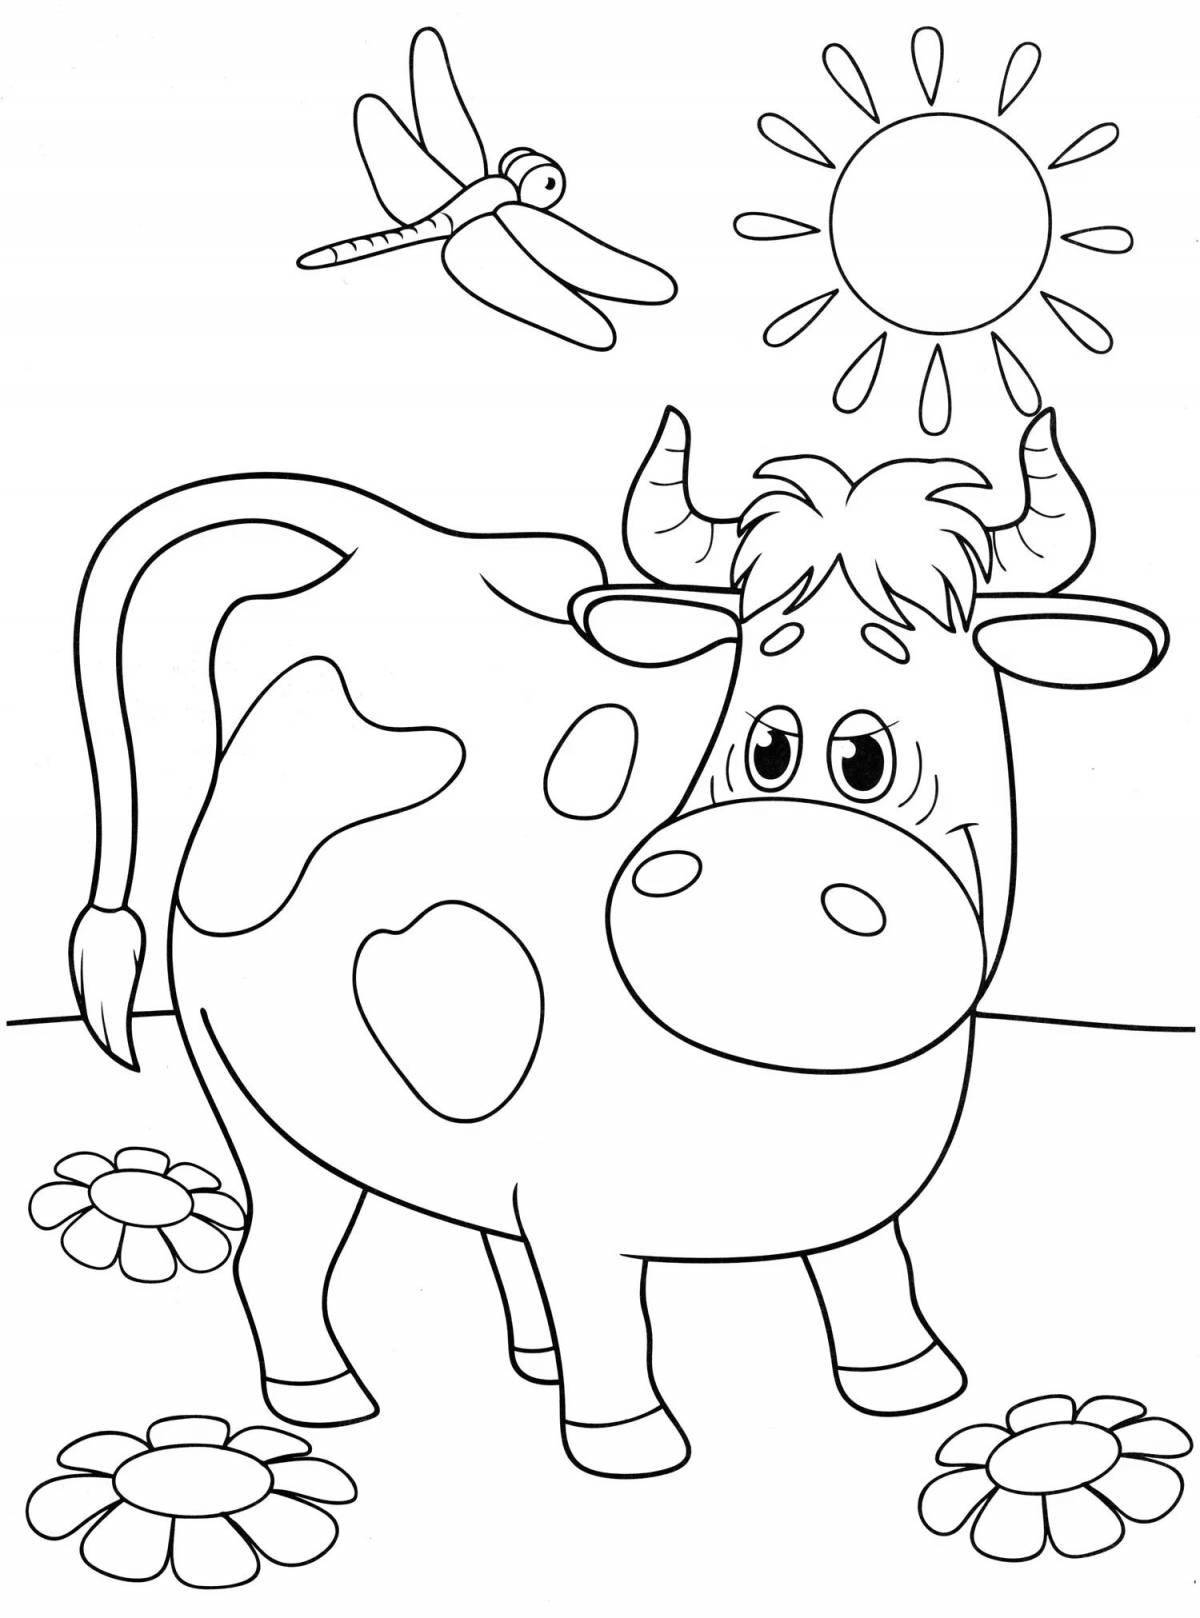 Cow fun coloring page